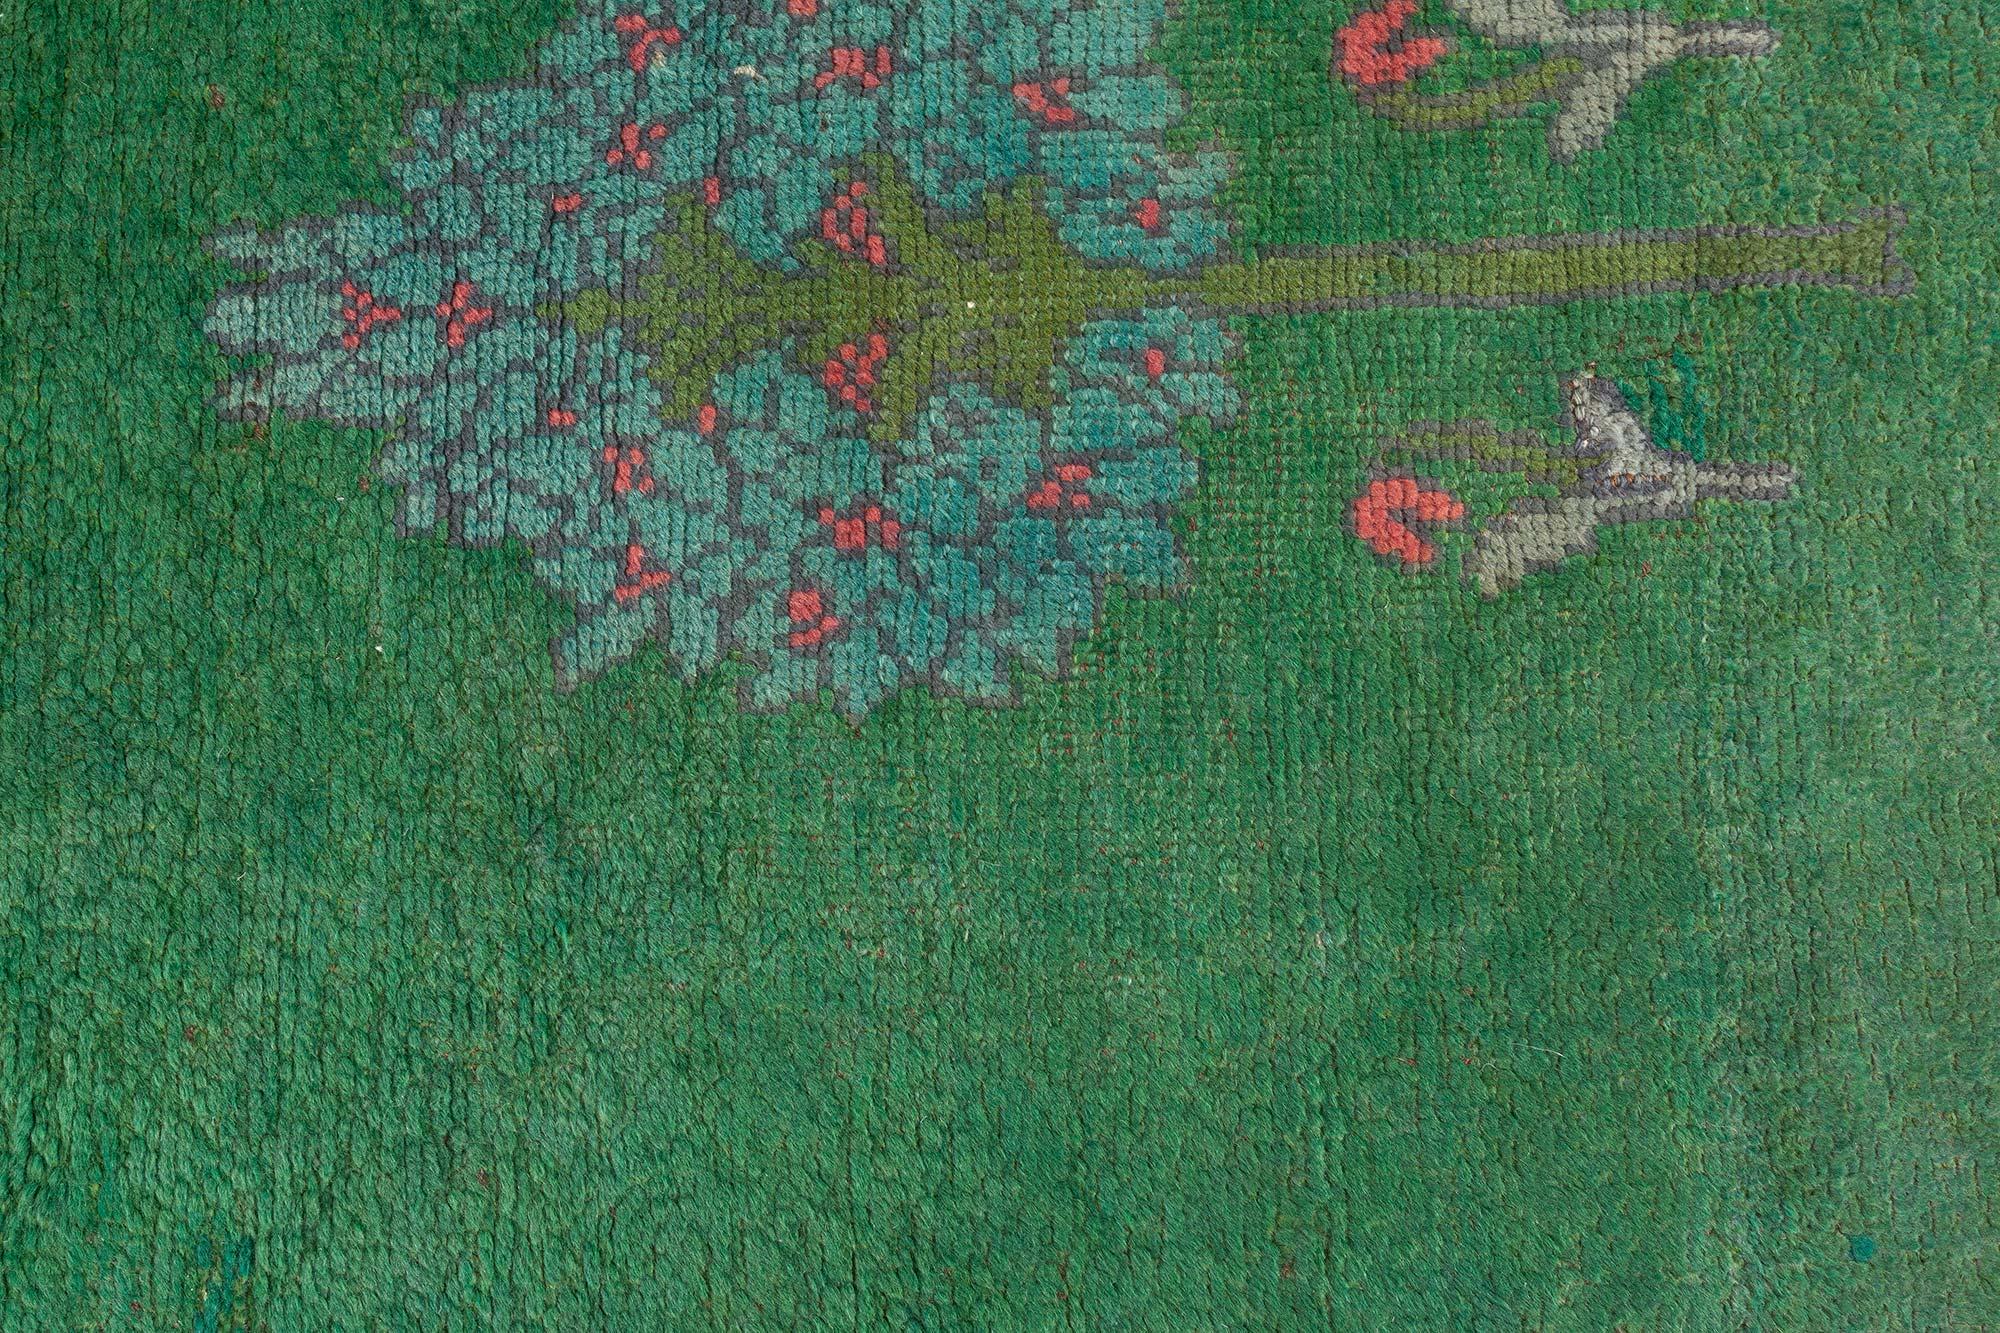 19th Century Donegal by Cfa Voysey Fragment Rug
Size: 3'0